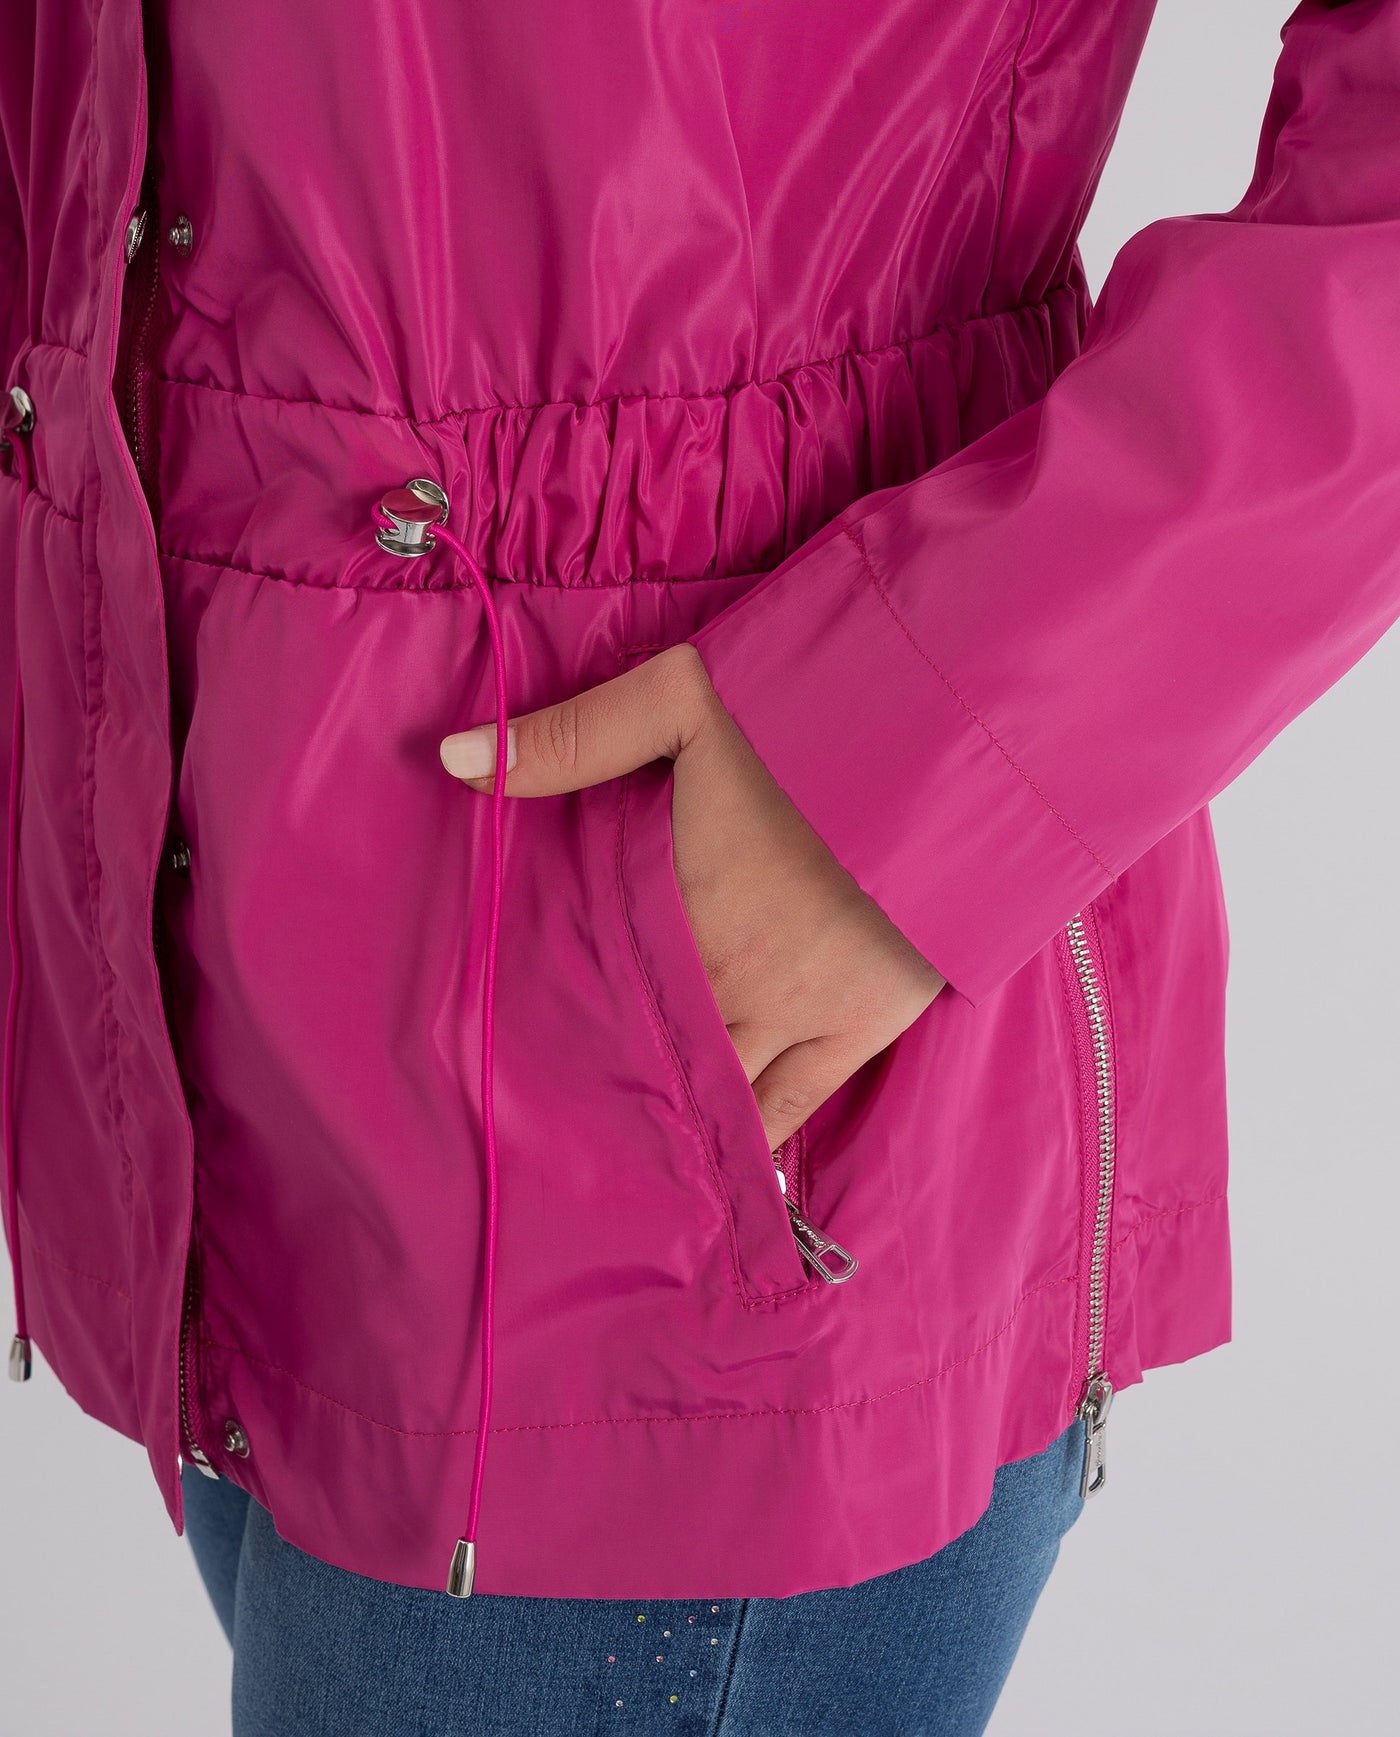 FITTED MAGENTA PARKA